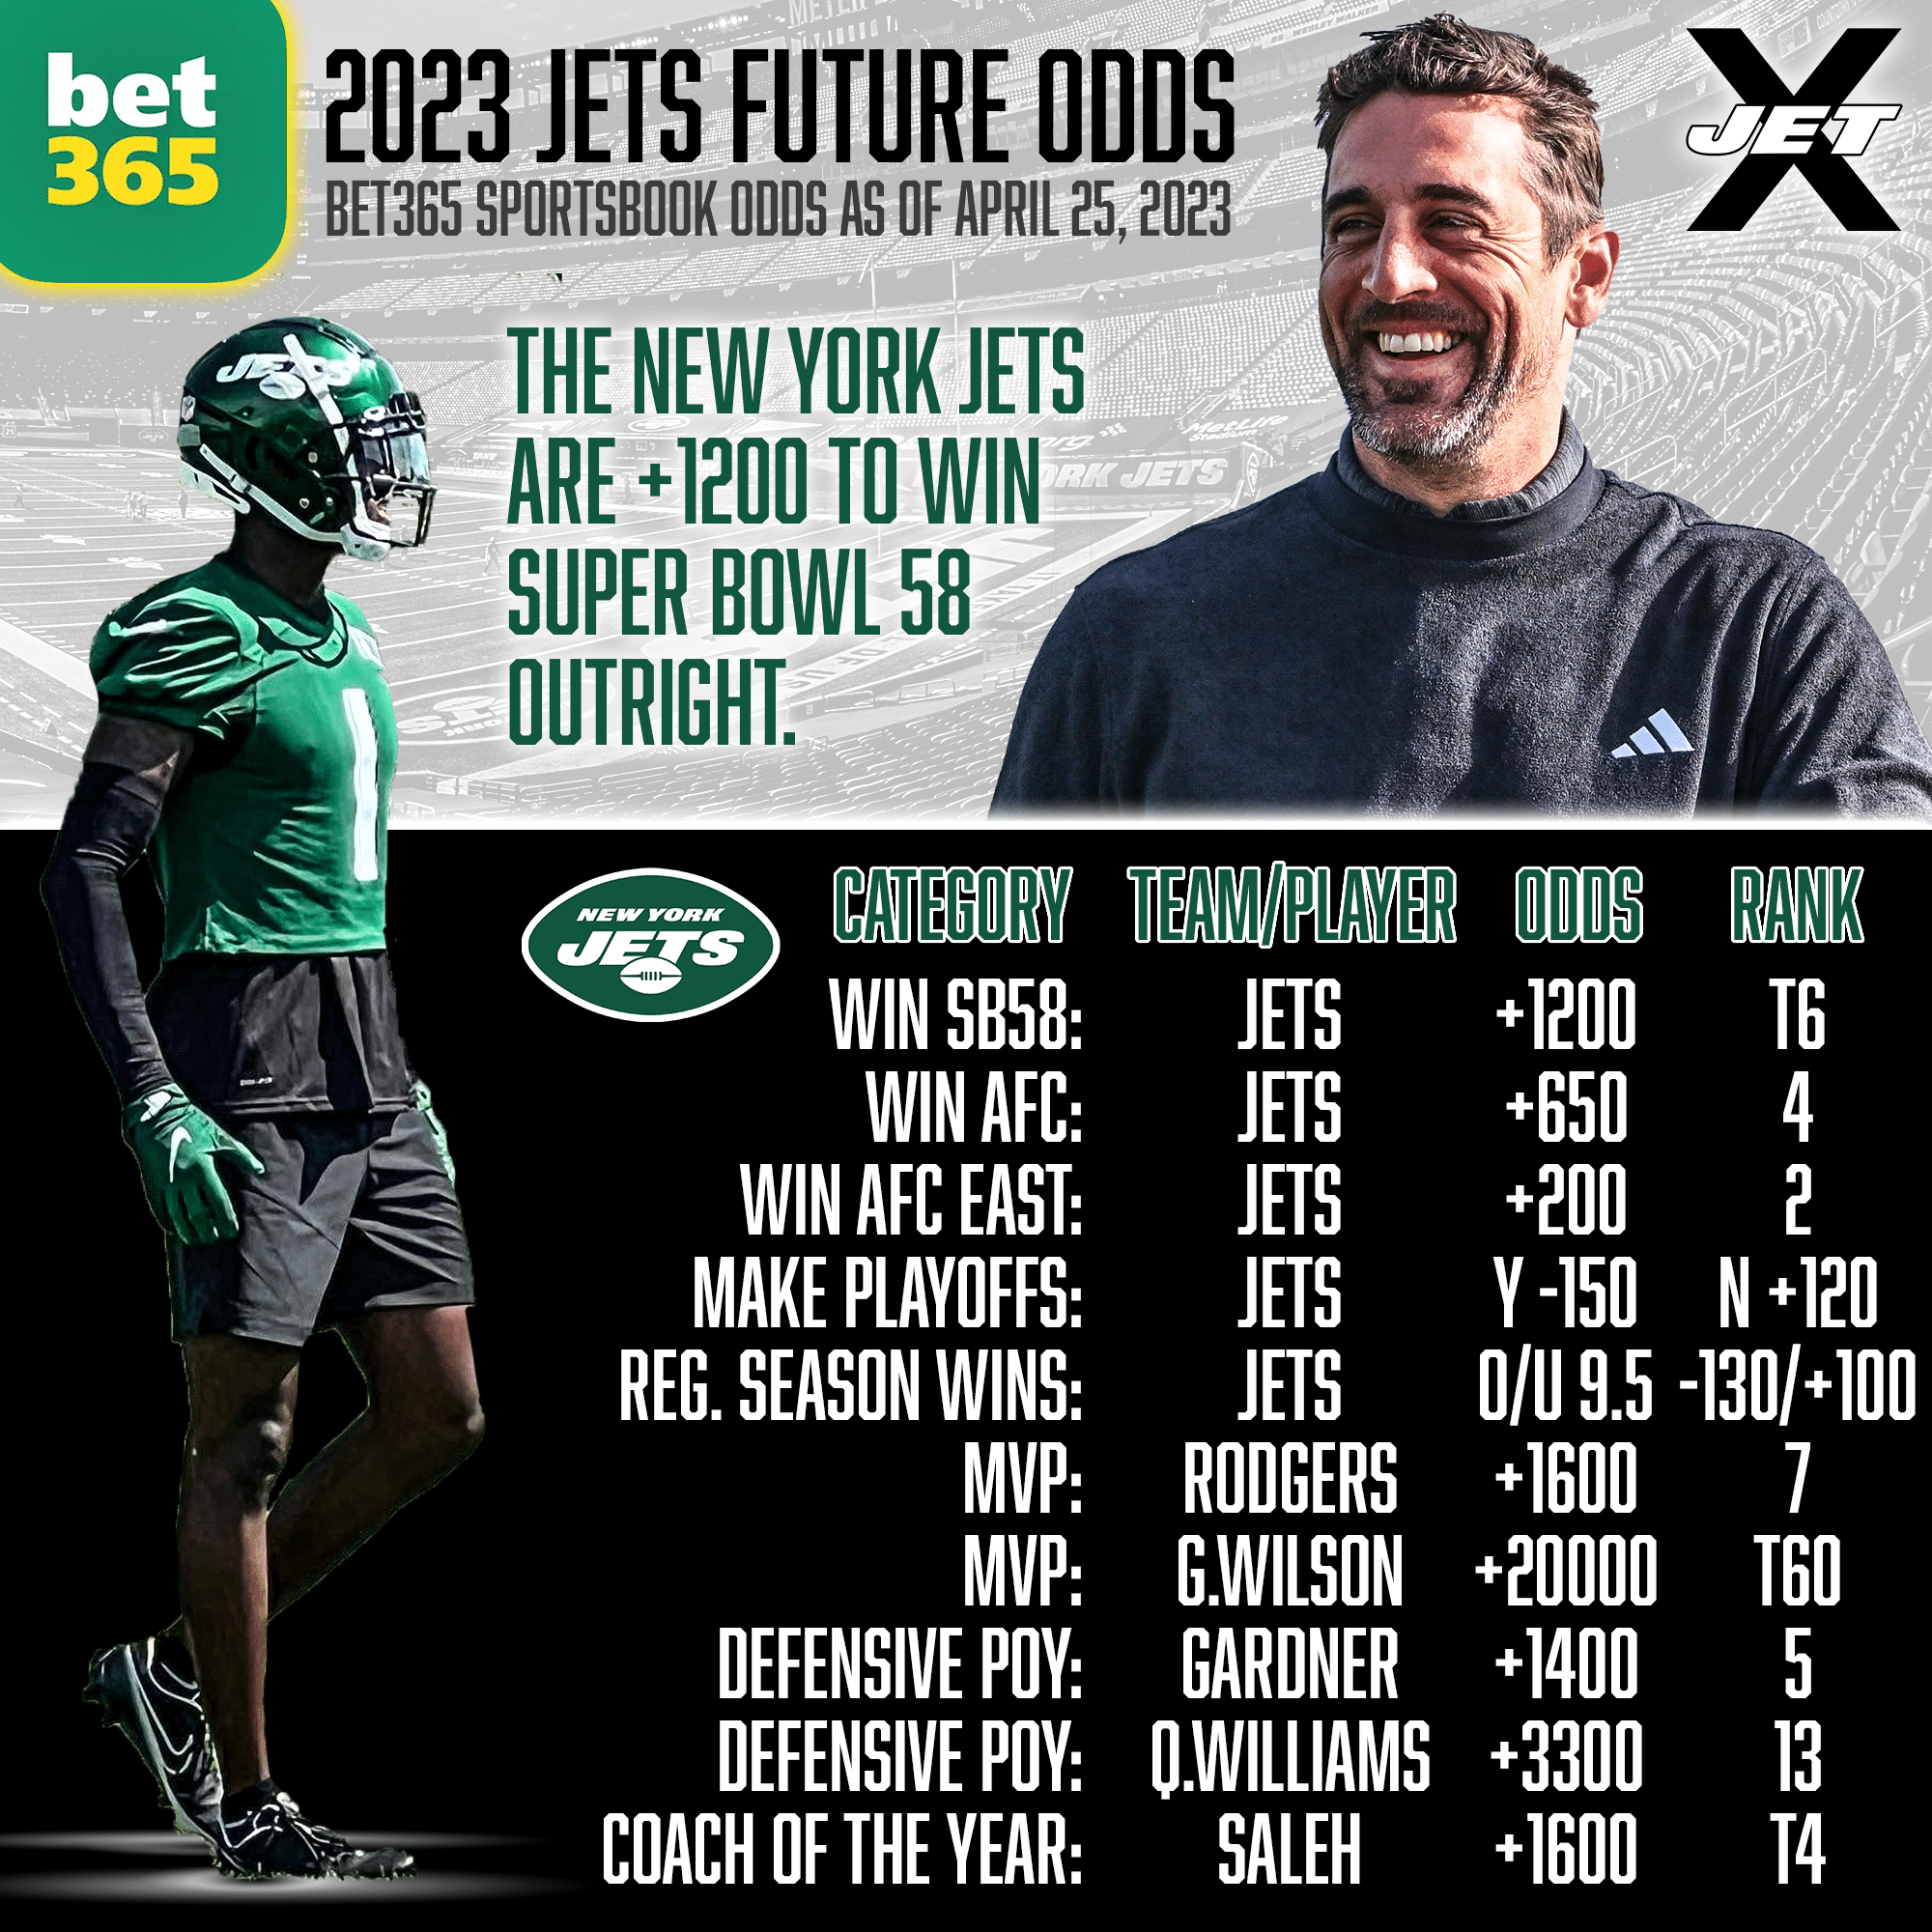 bet365 Sportsbook, New York Jets Futures Odds